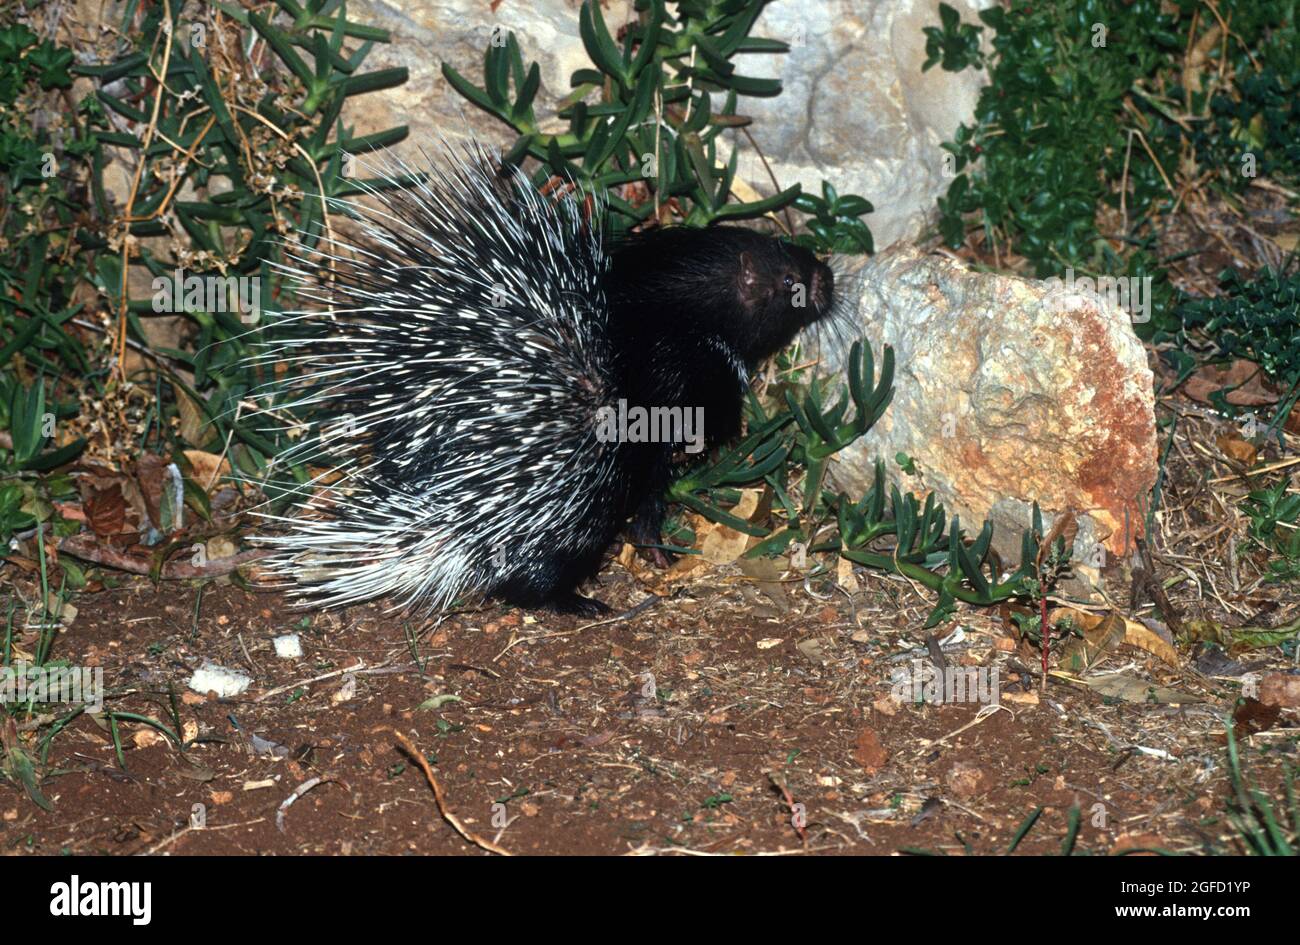 offspring  of Indian crested porcupine Stock Photo